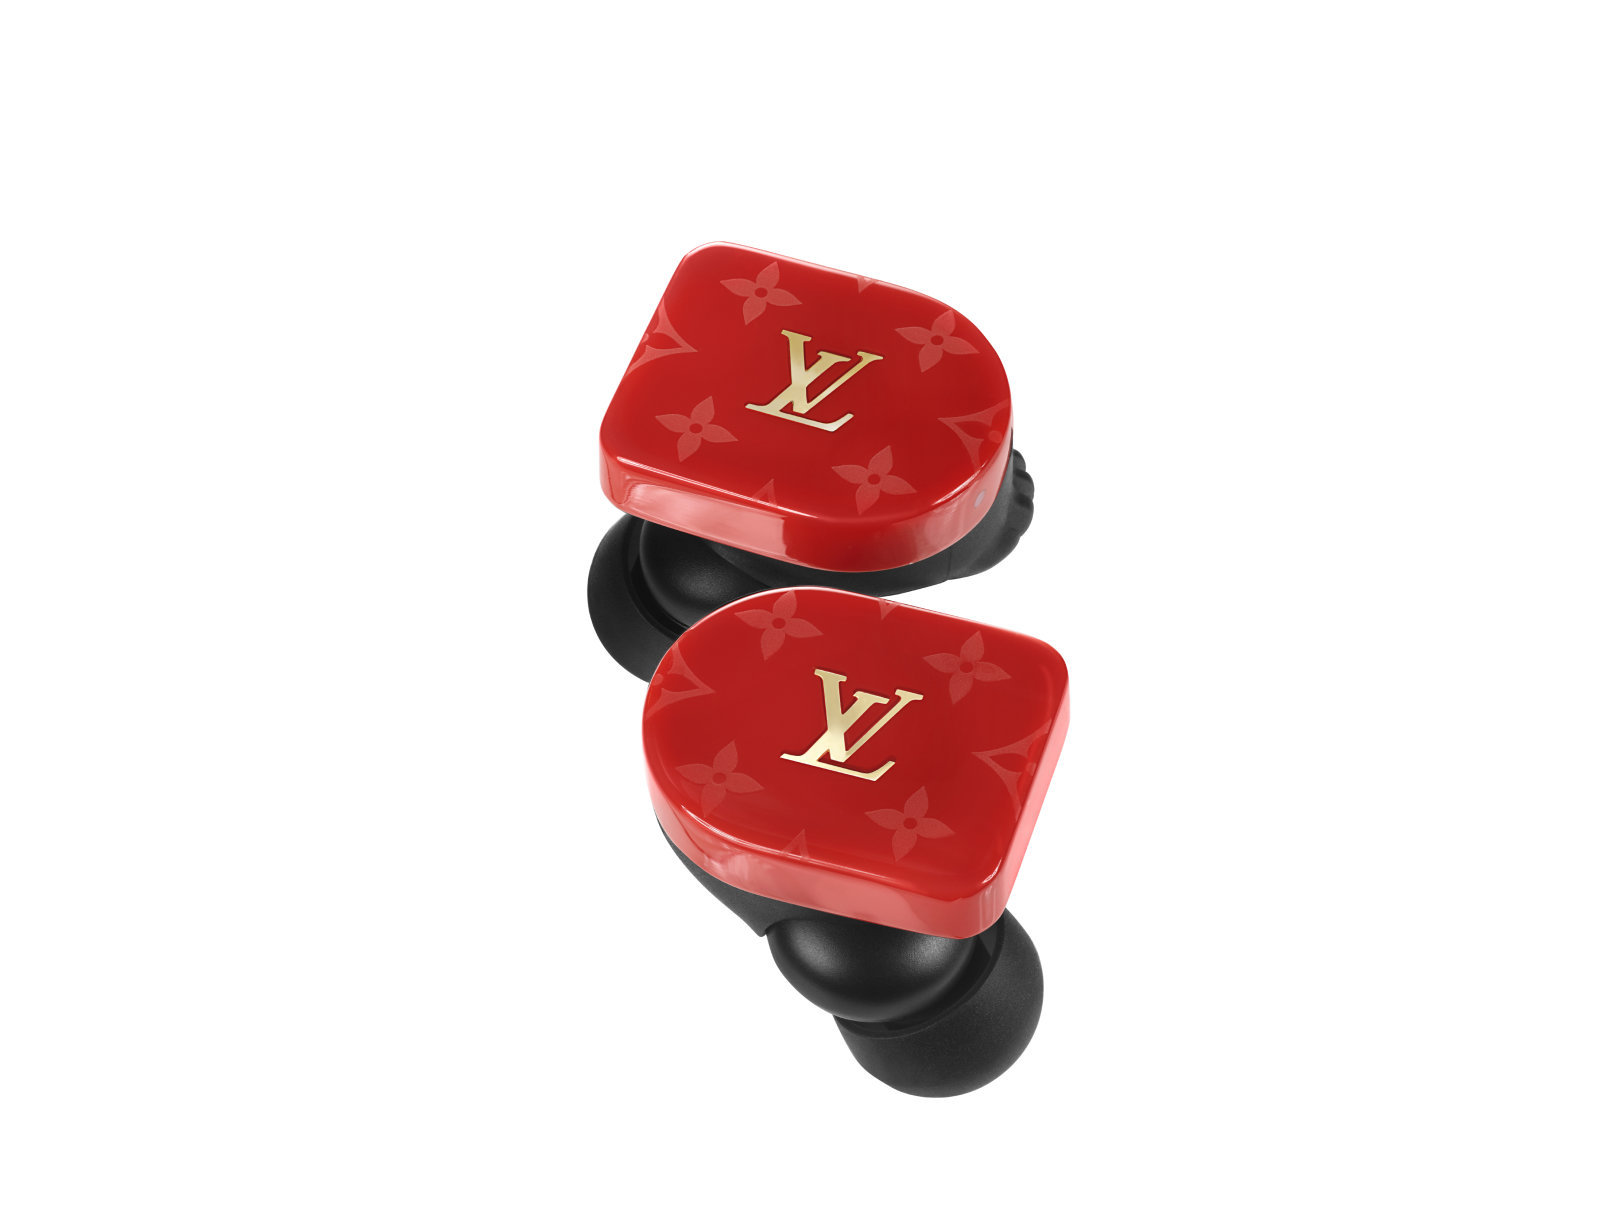 Paying for the name – Louis Vuitton’s Horizon earbuds will set you back R13,750